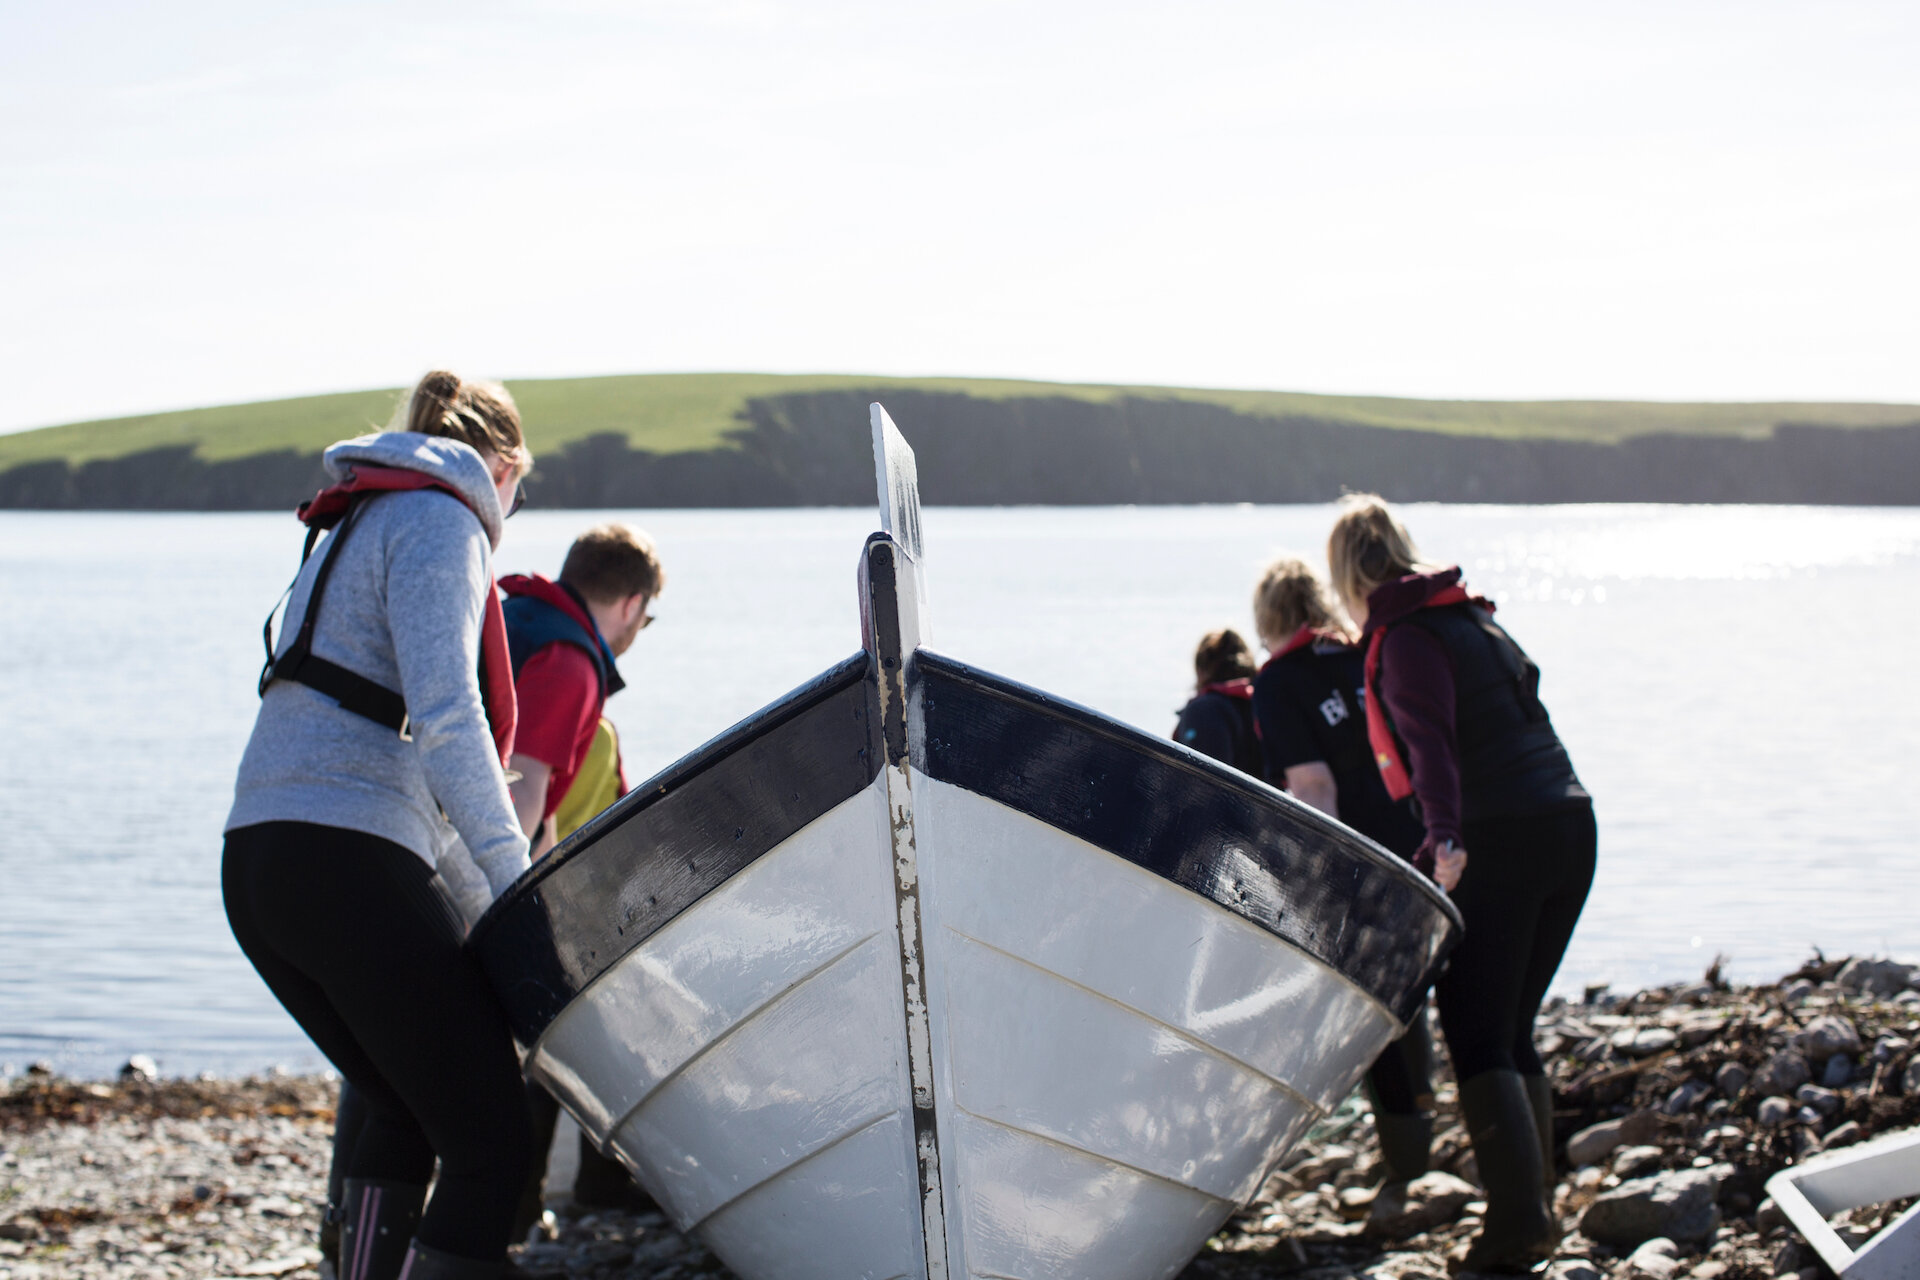 Yoal rowing is one of the ways to enjoy getting on the water in Shetland. | On the water